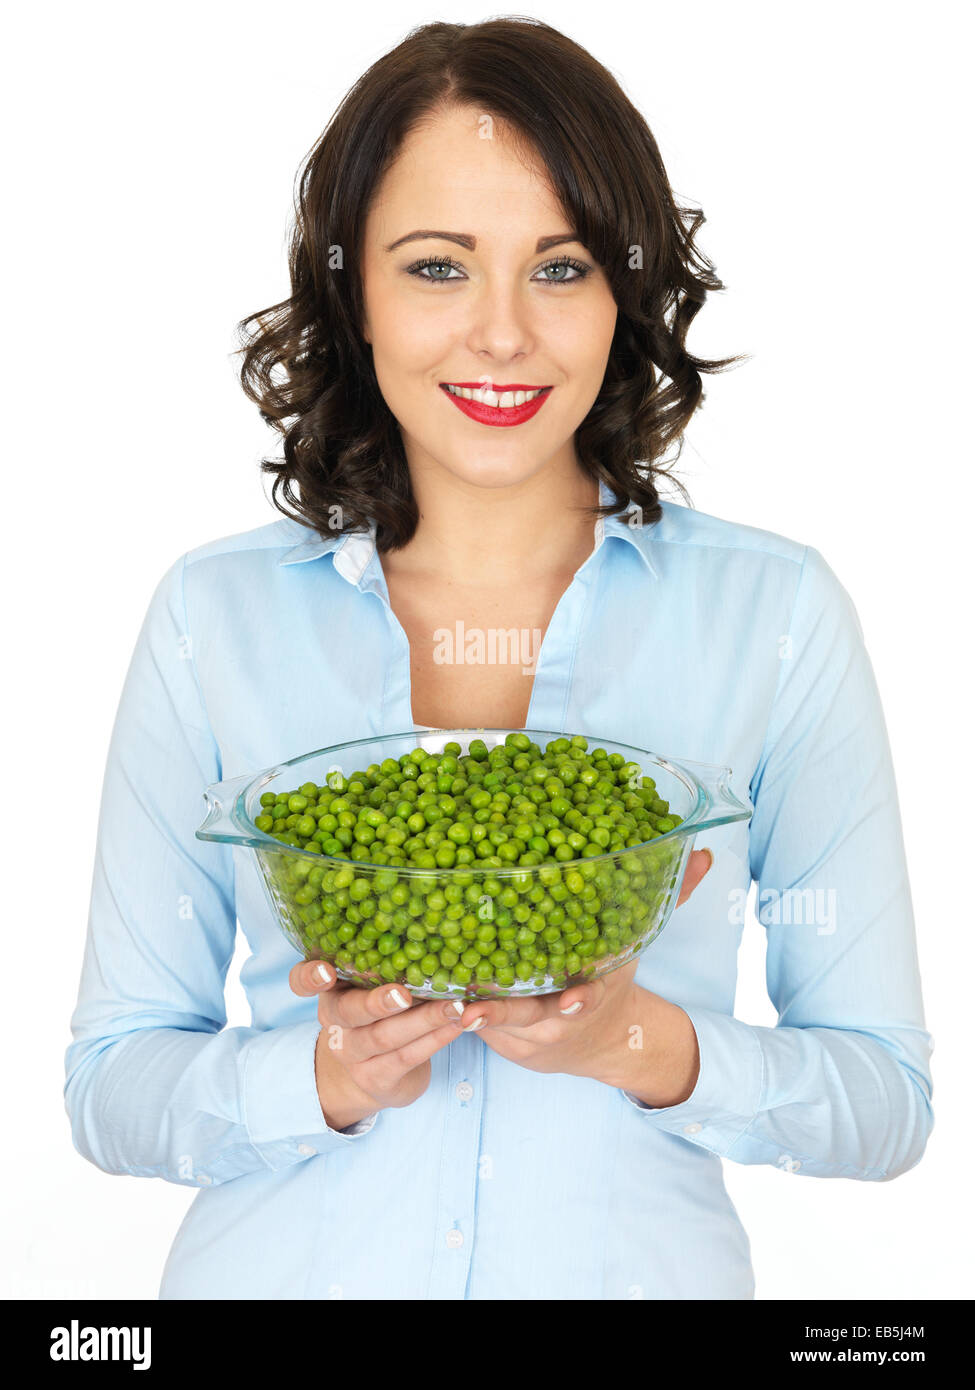 Attractive Young Woman Holding a Bowl of Cooked Peas Stock Photo